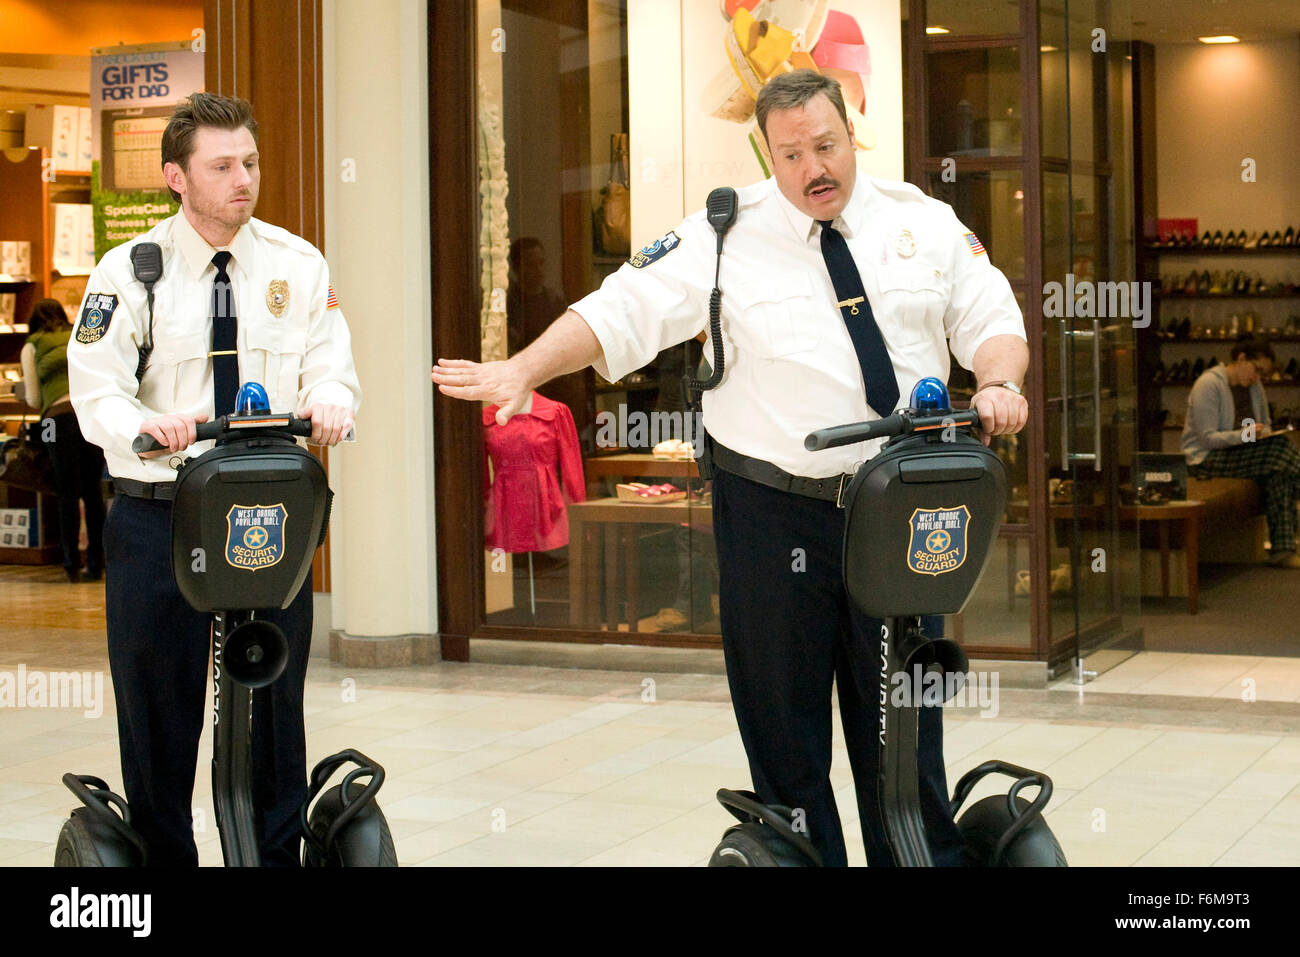 RELEASE DATE: January 16, 2009. MOVIE TITLE: Paul Blart: Mall Cop. STUDIO: Columbia Pictures. PLOT: When a shopping mall is overtaken by a gang of organized crooks, it's up to the a mild-mannered security guard to save the day. PICTURED: KEIR O'DONNELL as Veck Sims and KEVIN JAMES as Paul Blart. Stock Photo